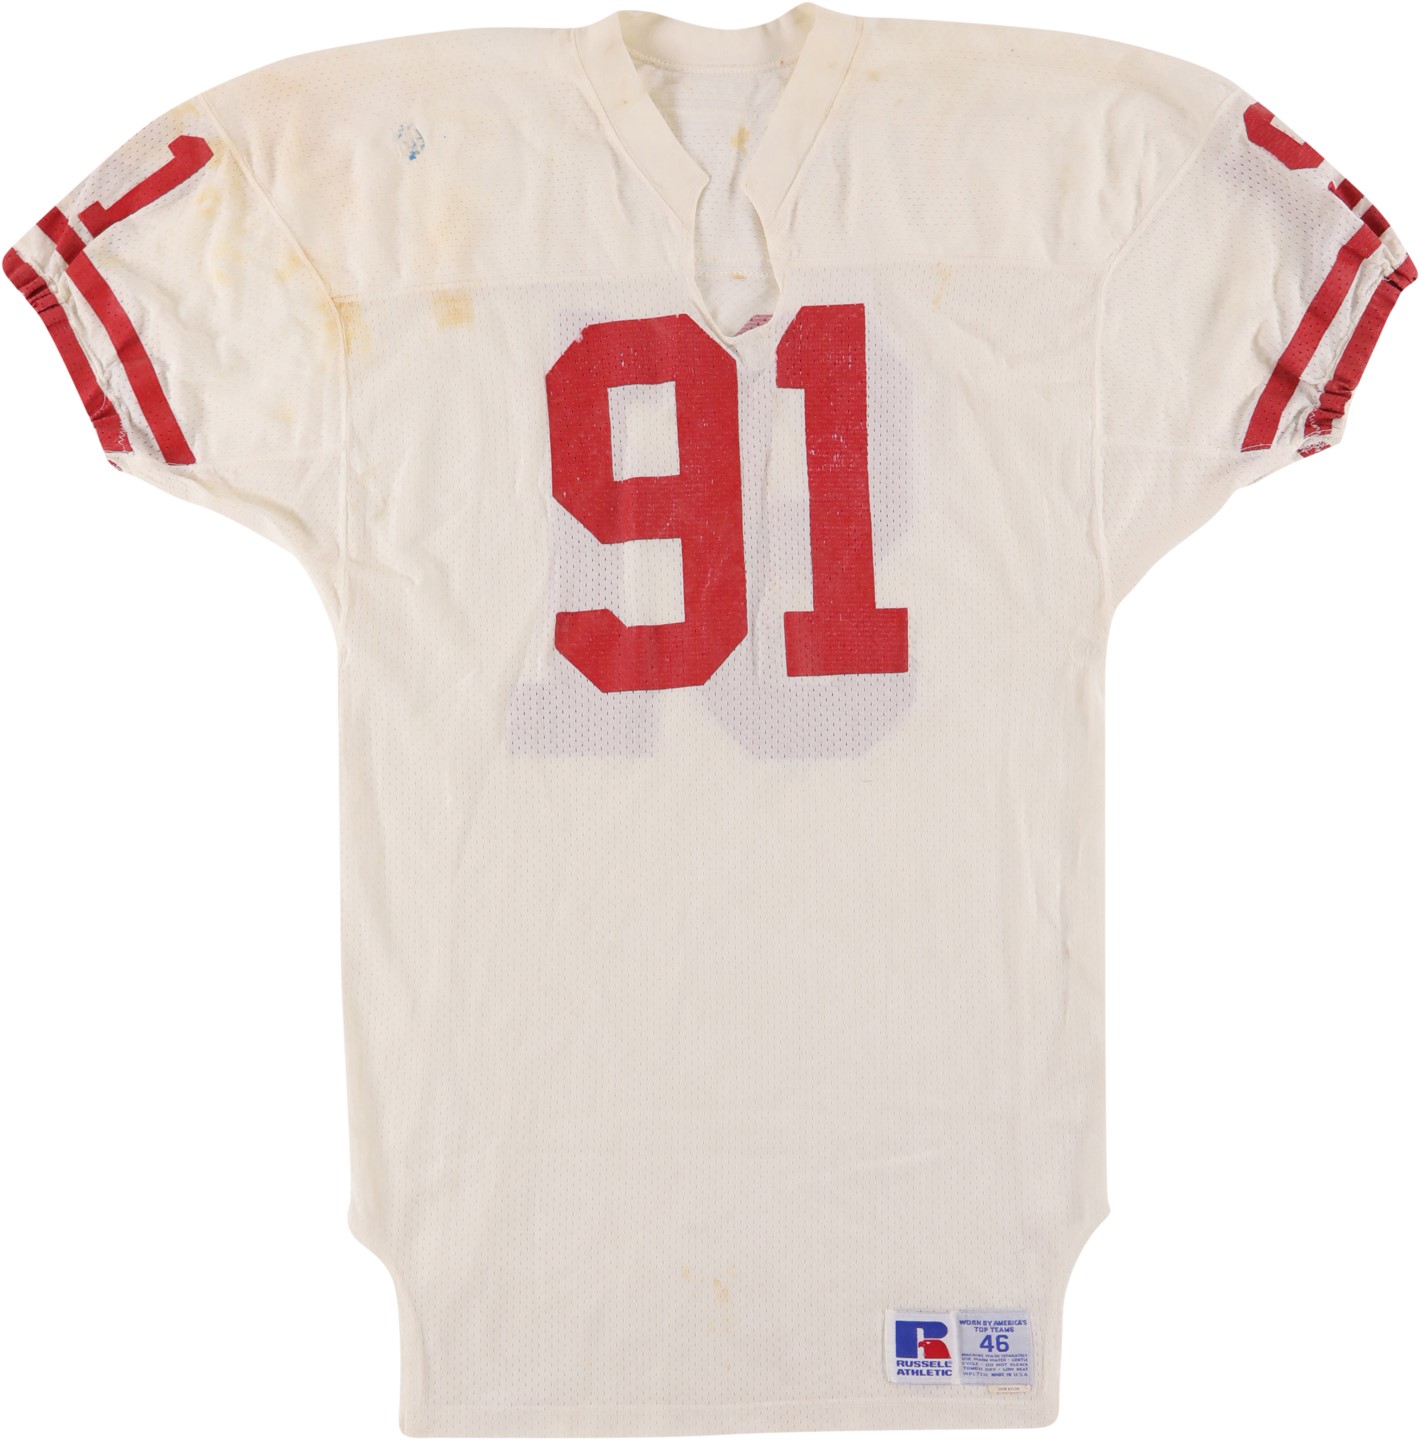 - 1988-89 Larry Roberts San Francisco 49ers Signed Game Worn Jersey (Equipment Manager LOA)